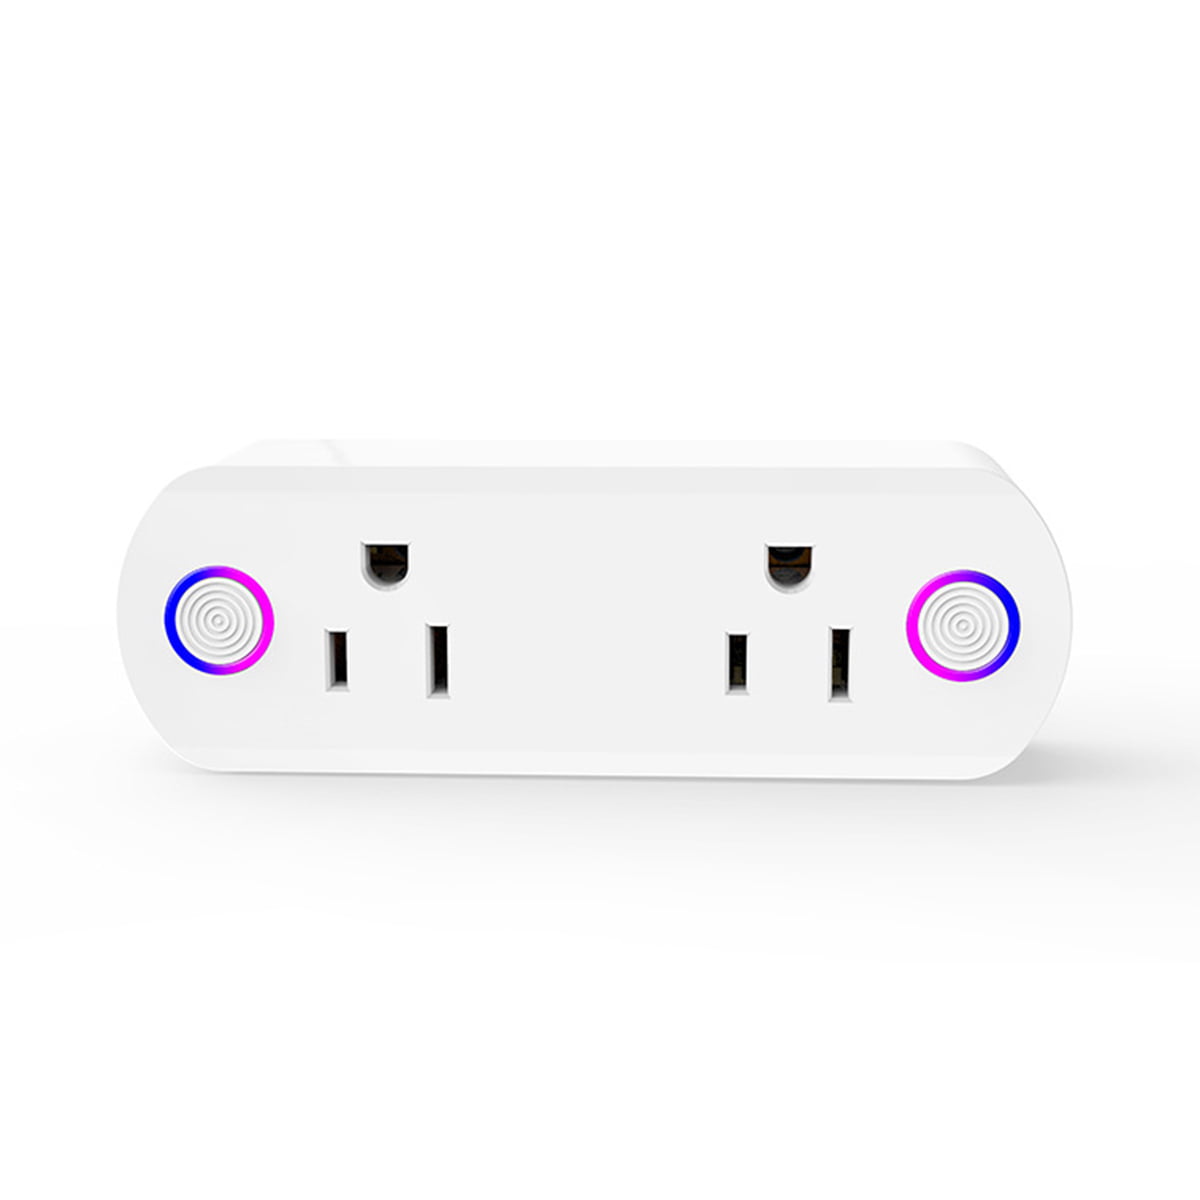 BESTEK Smart Plug,Wi-Fi Enabled Mini Outlet Smart Socket,Touch Switch 10A  1250W Max Works with Alexa,Google Home & IFTTT,No Hub Required - 2 Pack